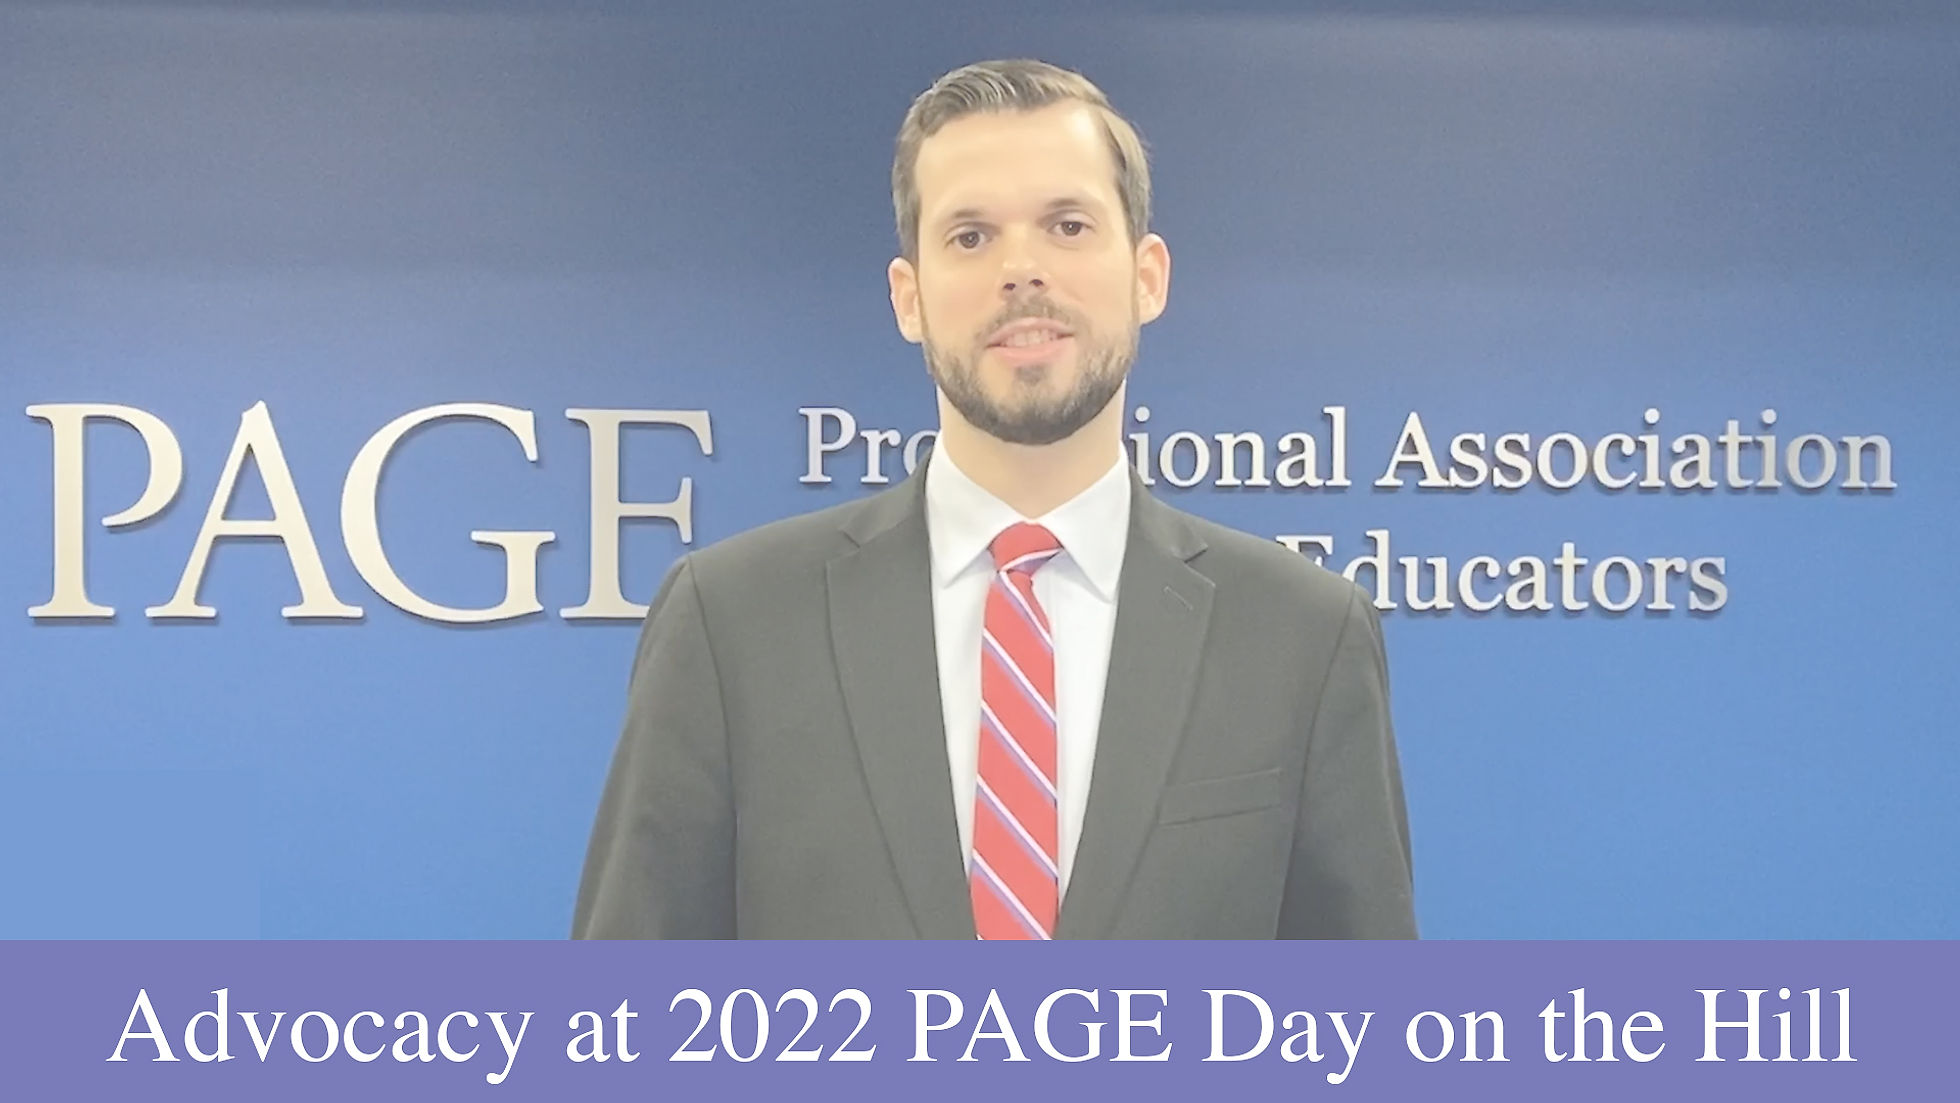 Advocacy at 2022 PAGE Day on the Hill